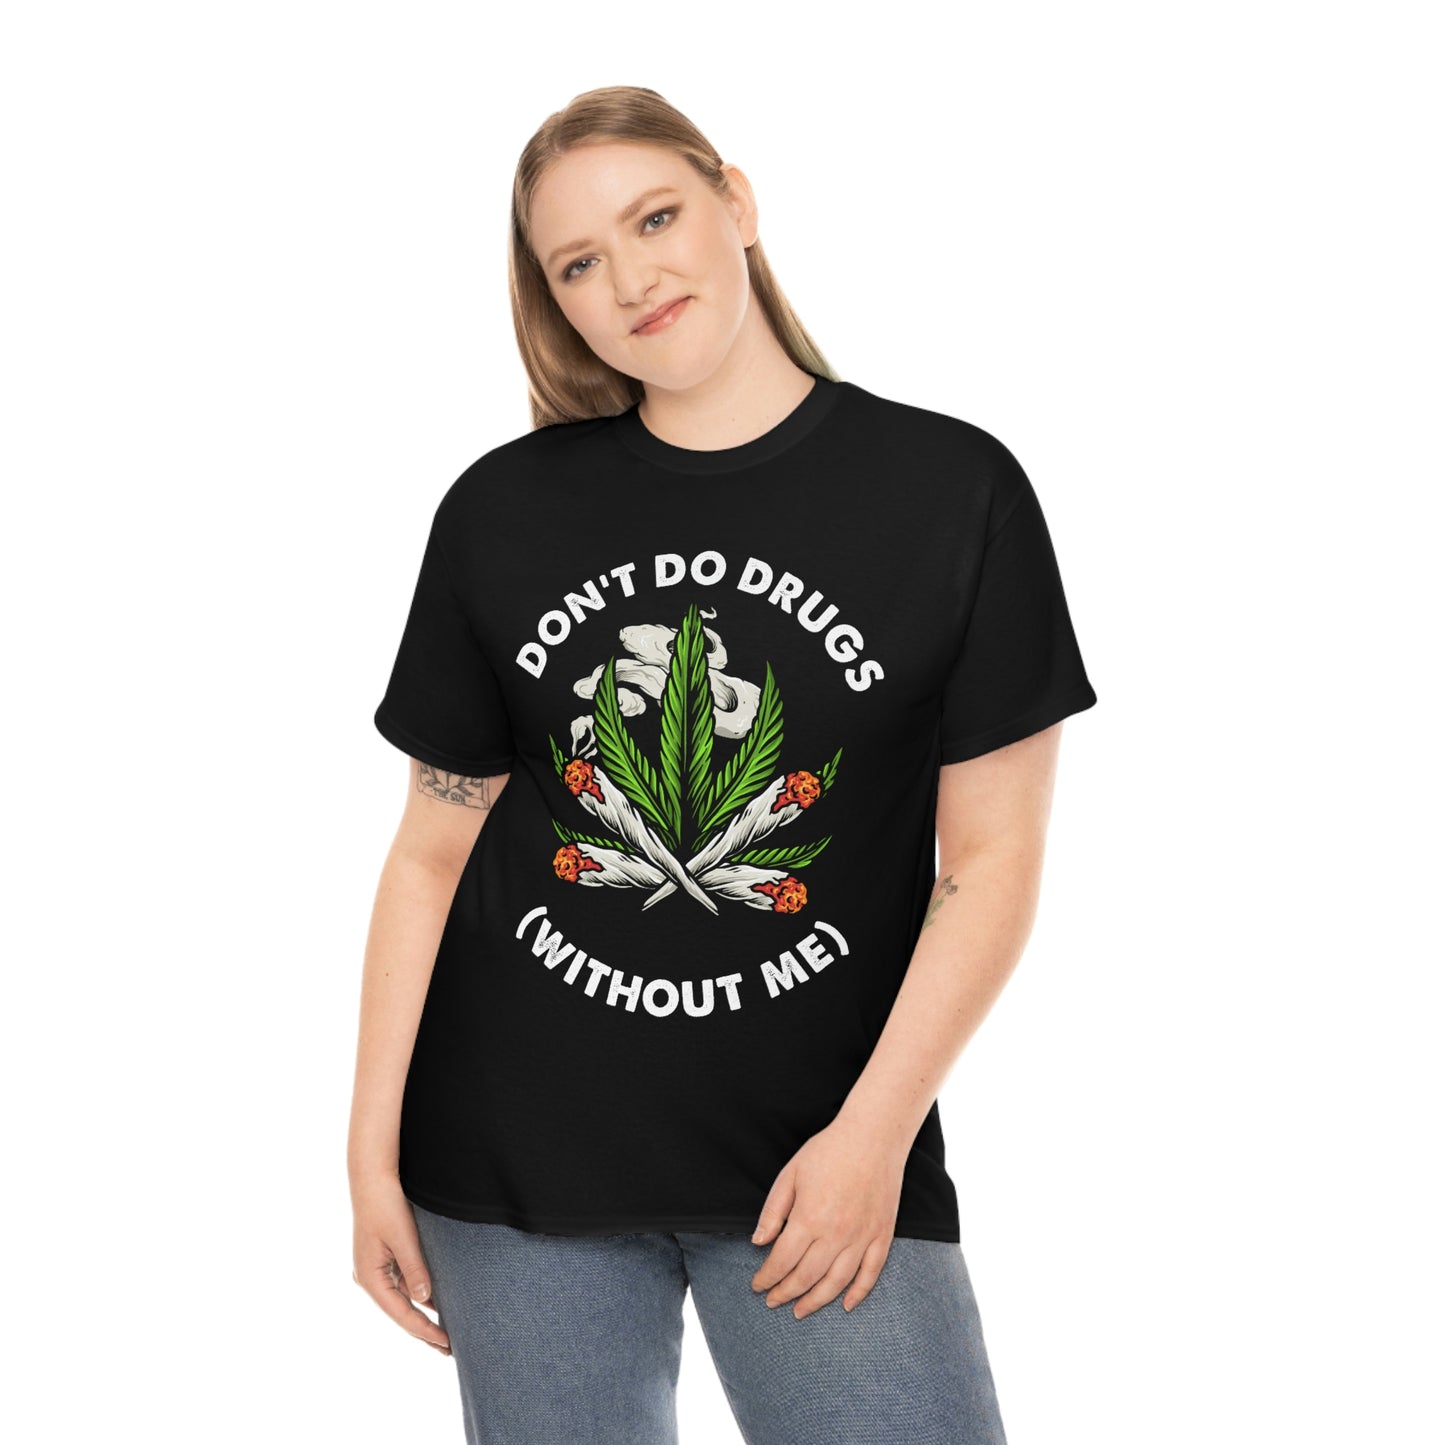 Don't Do Drugs (Without Me) Tee